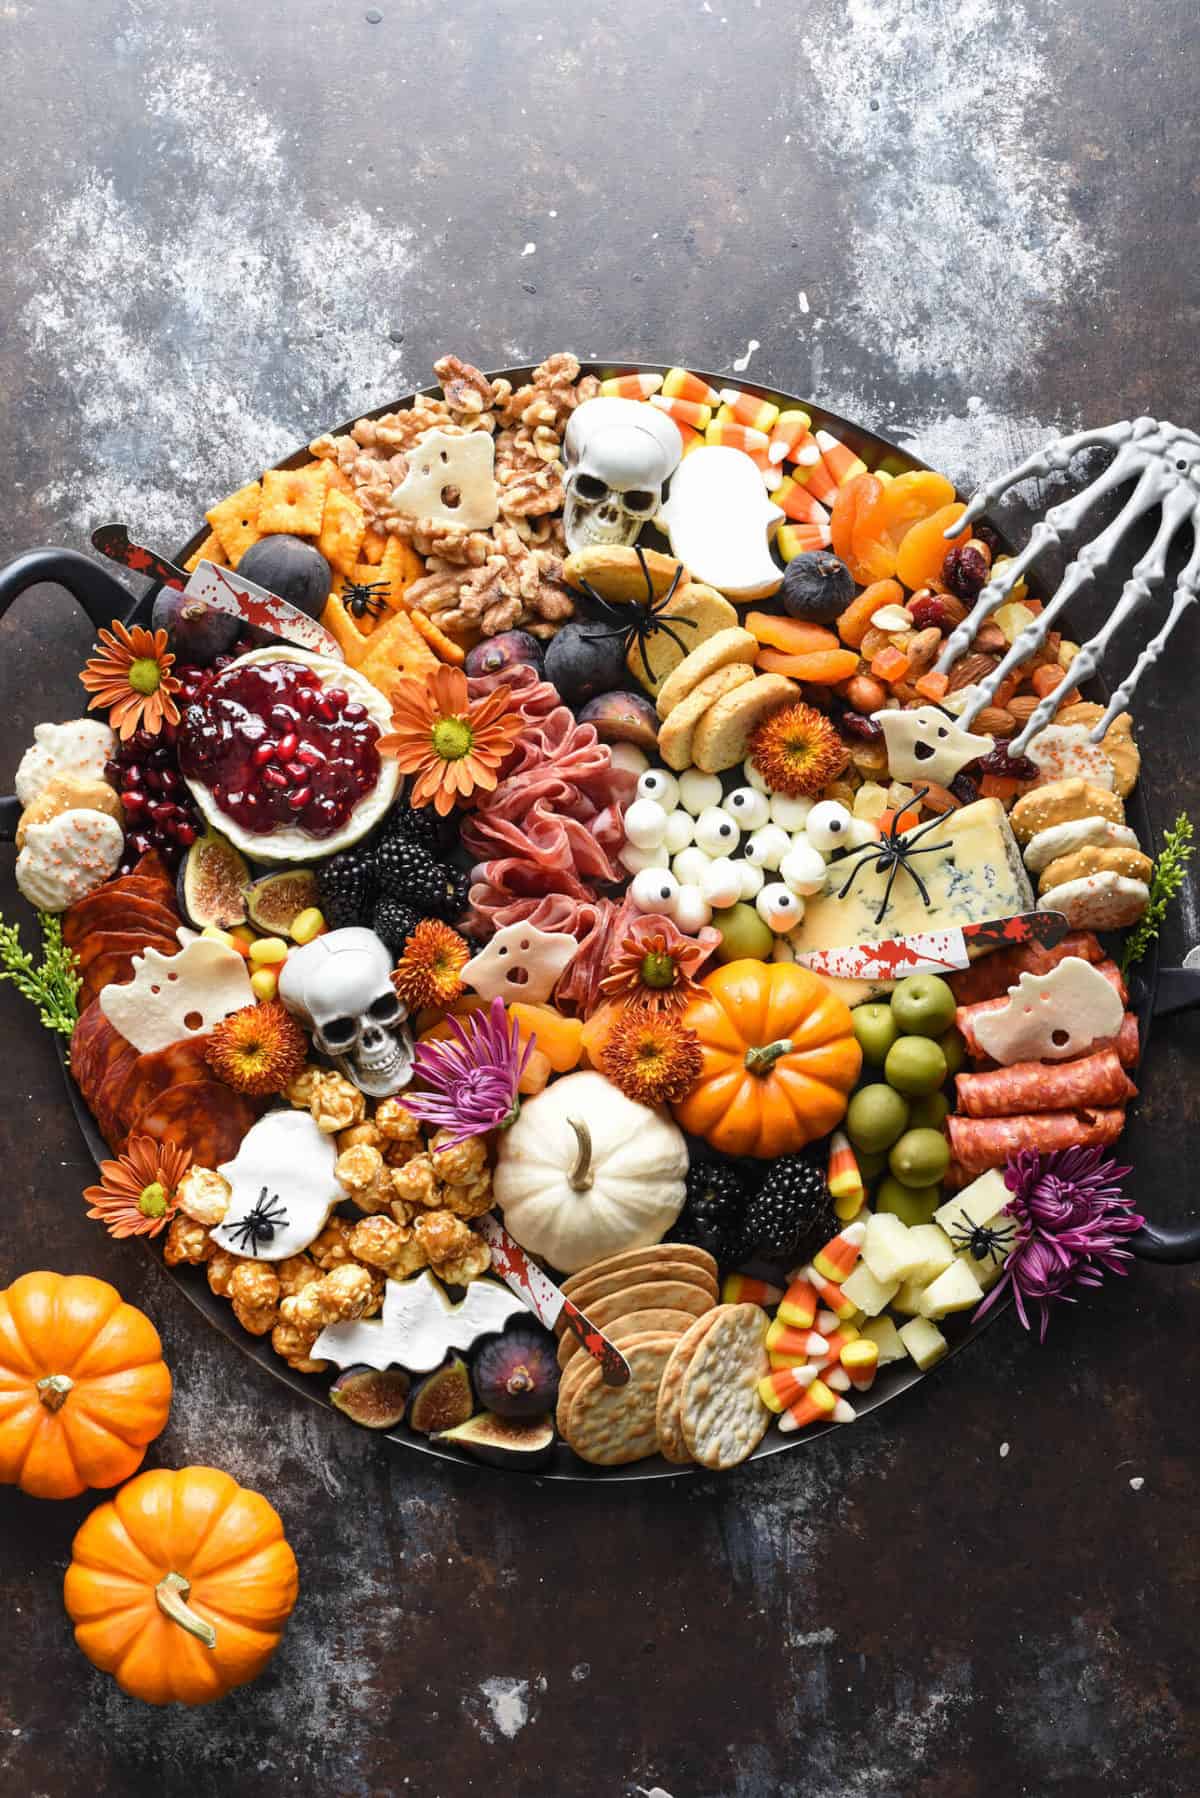 Healthy halloween snack ideas: a large charcuterie board filled with cheeses, meats, pumpkins, candy corns, skulls,, crackers, blackberries, and more